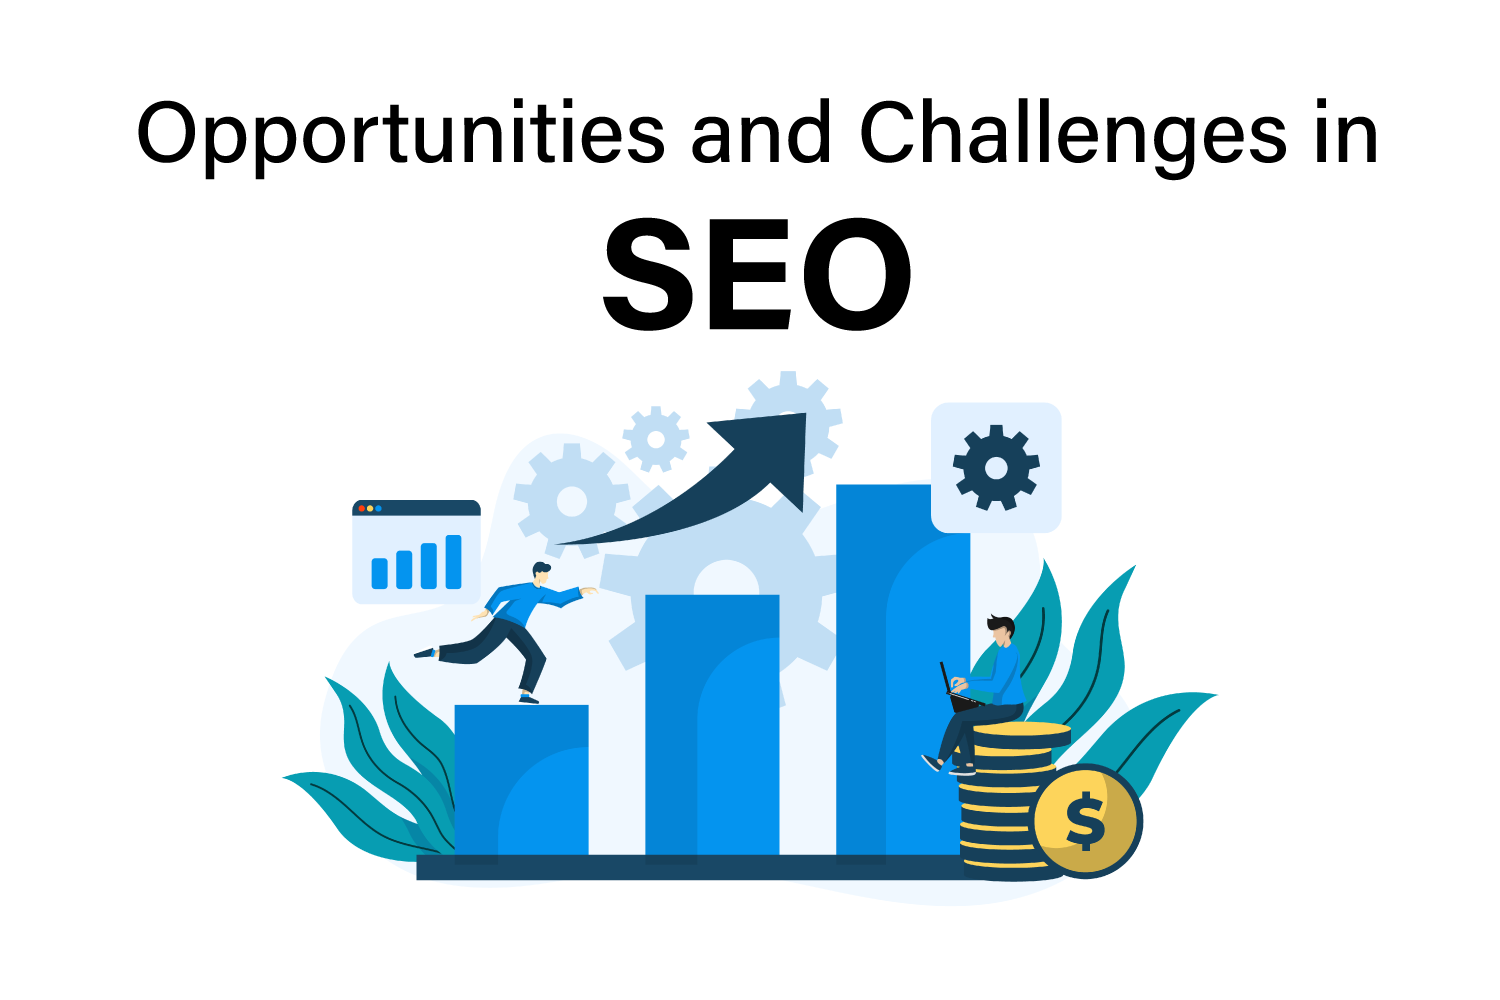 Opportunities and challenges in SEO